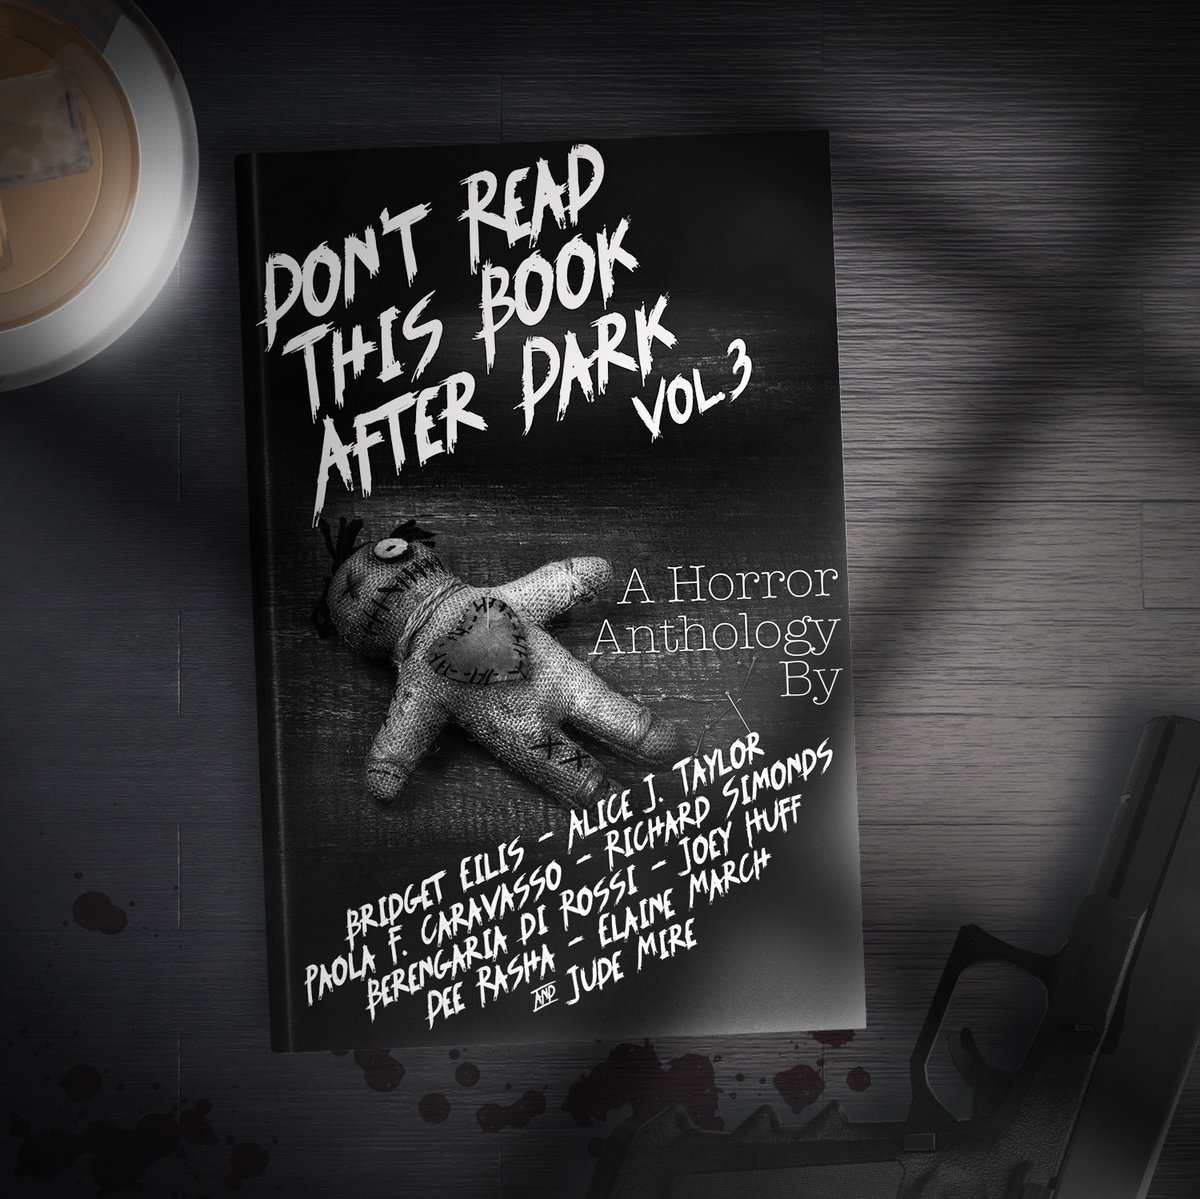 Nine authors. Nineteen chilling tales. Hitting shelves and eReaders on April 22nd. Preorder now!
books2read.com/DRTBAD3
.
 #bookstagram #horror #drtbad #anthology #horroranthology #horrorshort #horrorshortstories #anthologyshorts